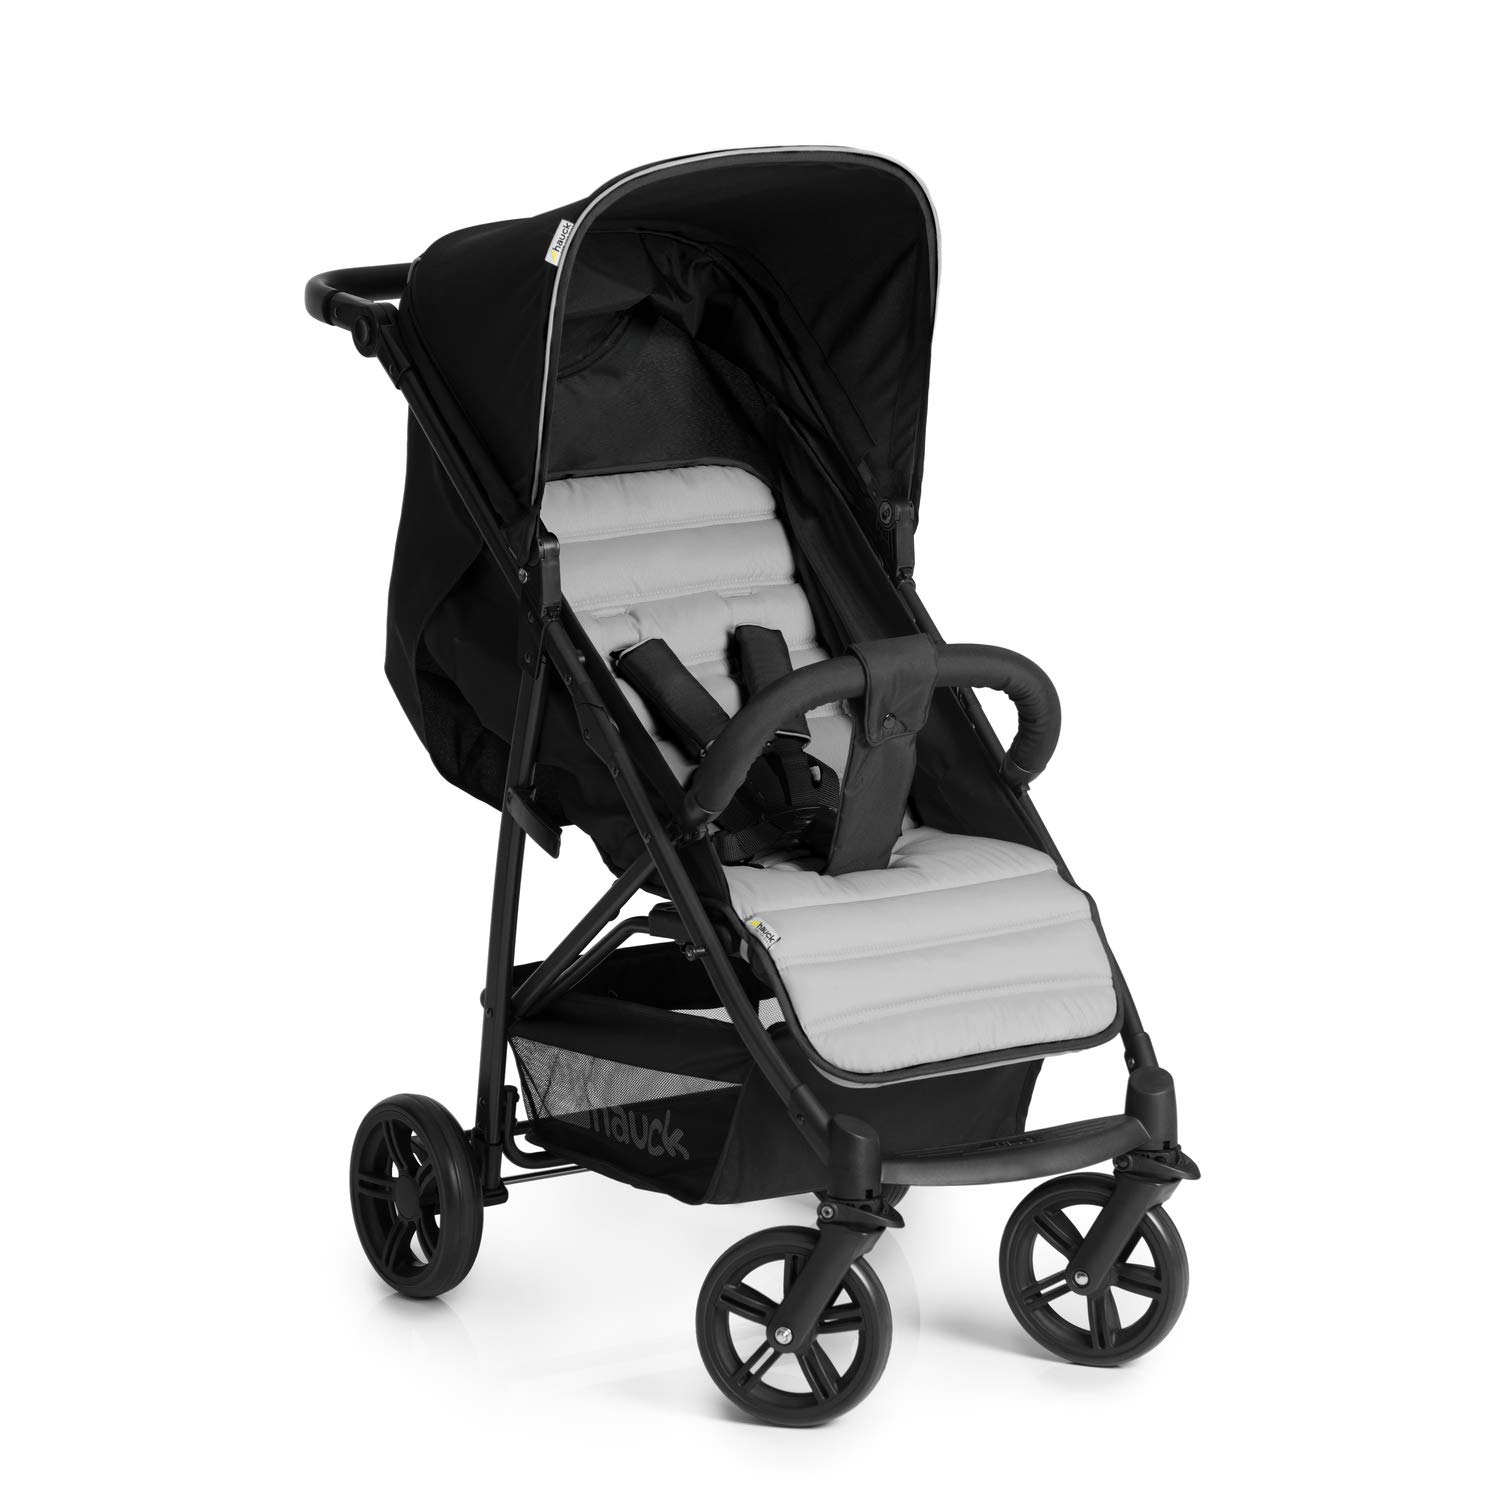 Hauck Rapid 4 strollers from 0 months to 22 kg, foldable, compact, with one hand, with sleeping position, height-adjustable handle, large basket, black gray